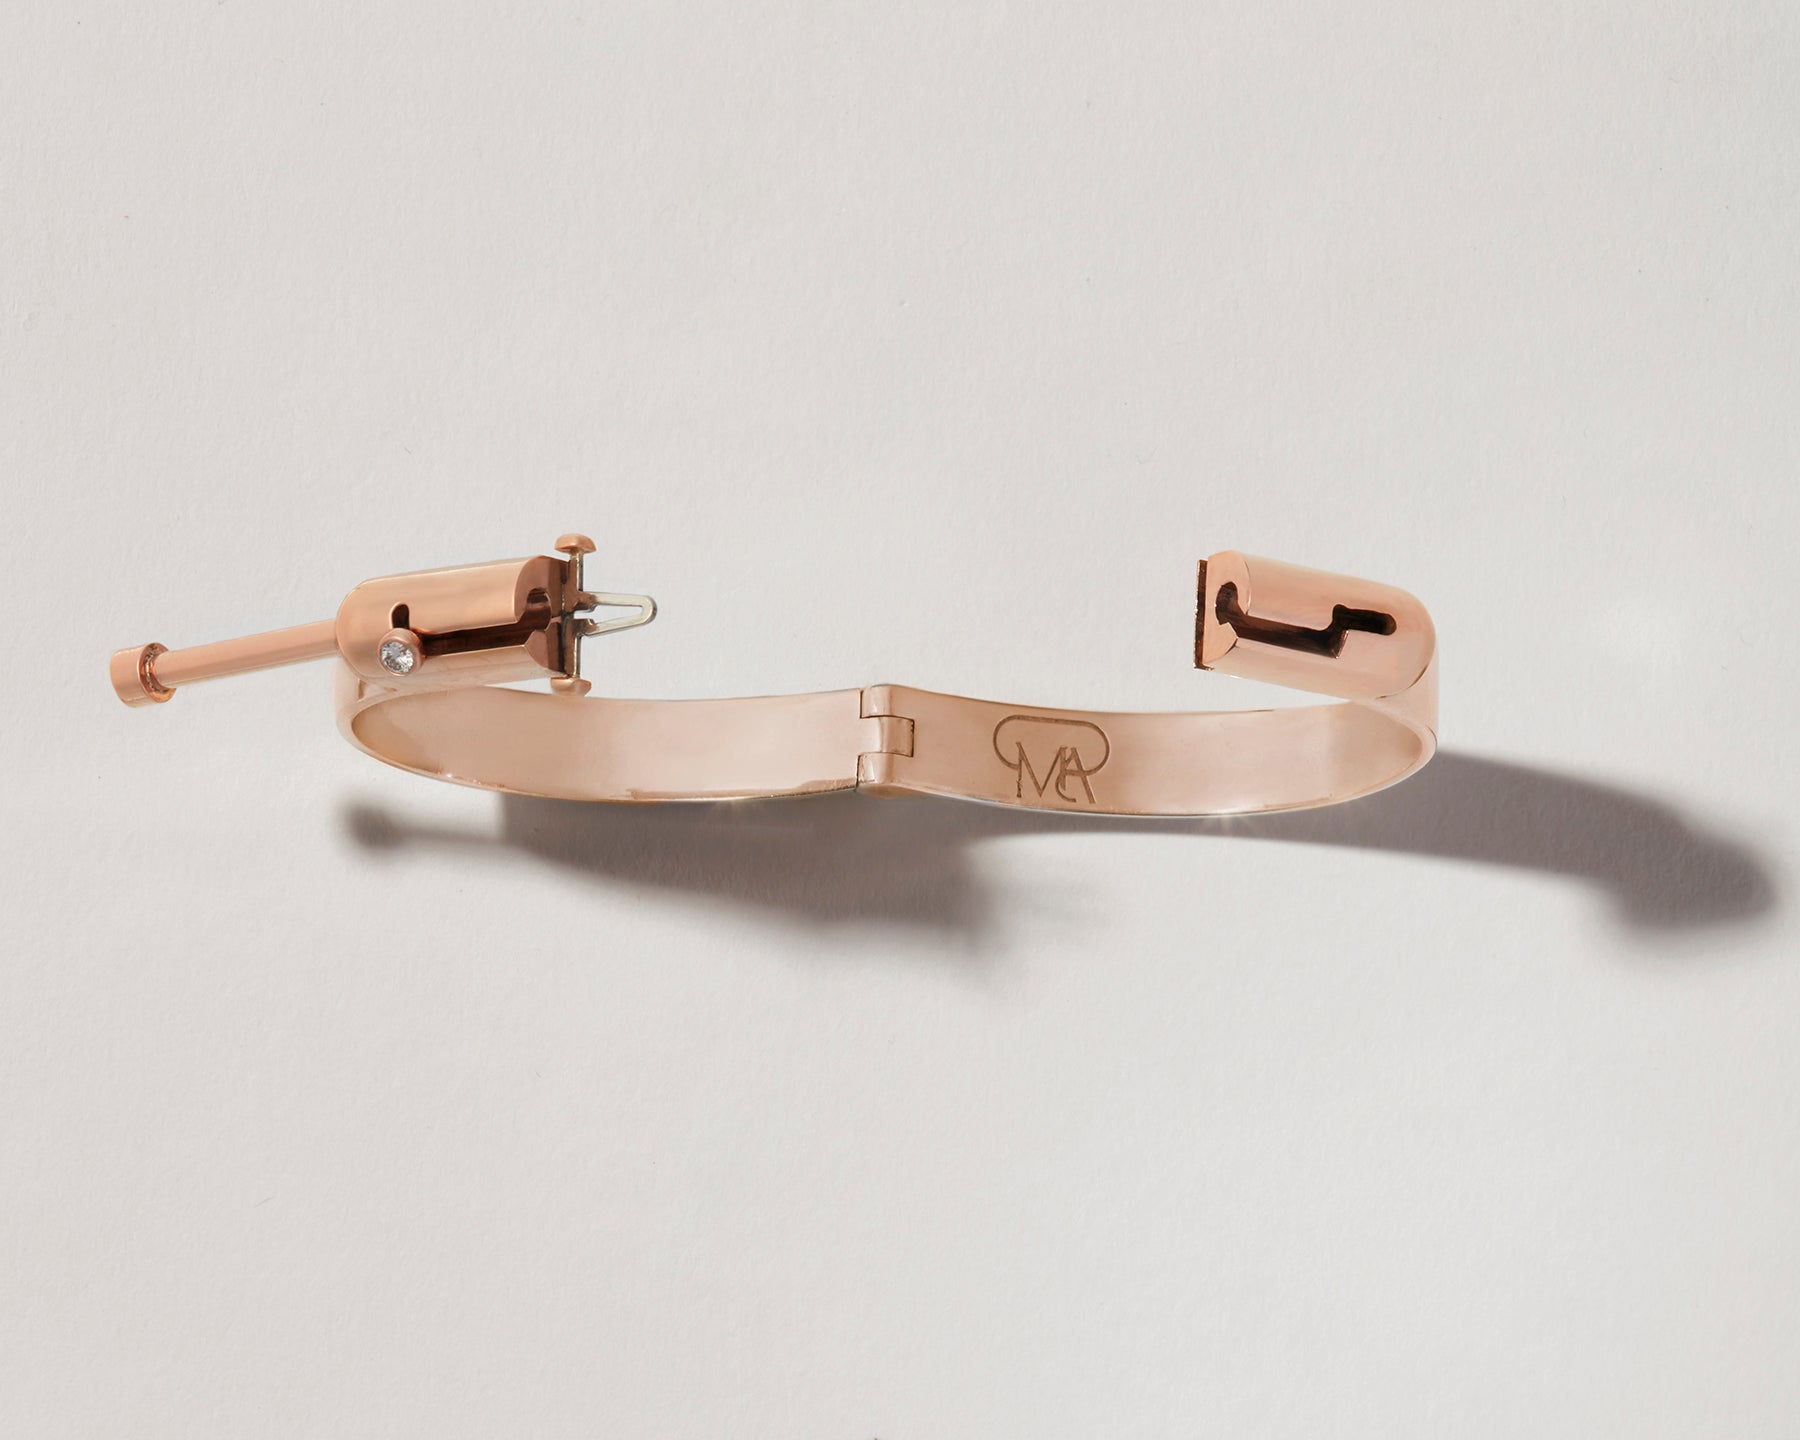 Overhead shot of rose gold bracelet with clasp open against white backdrop